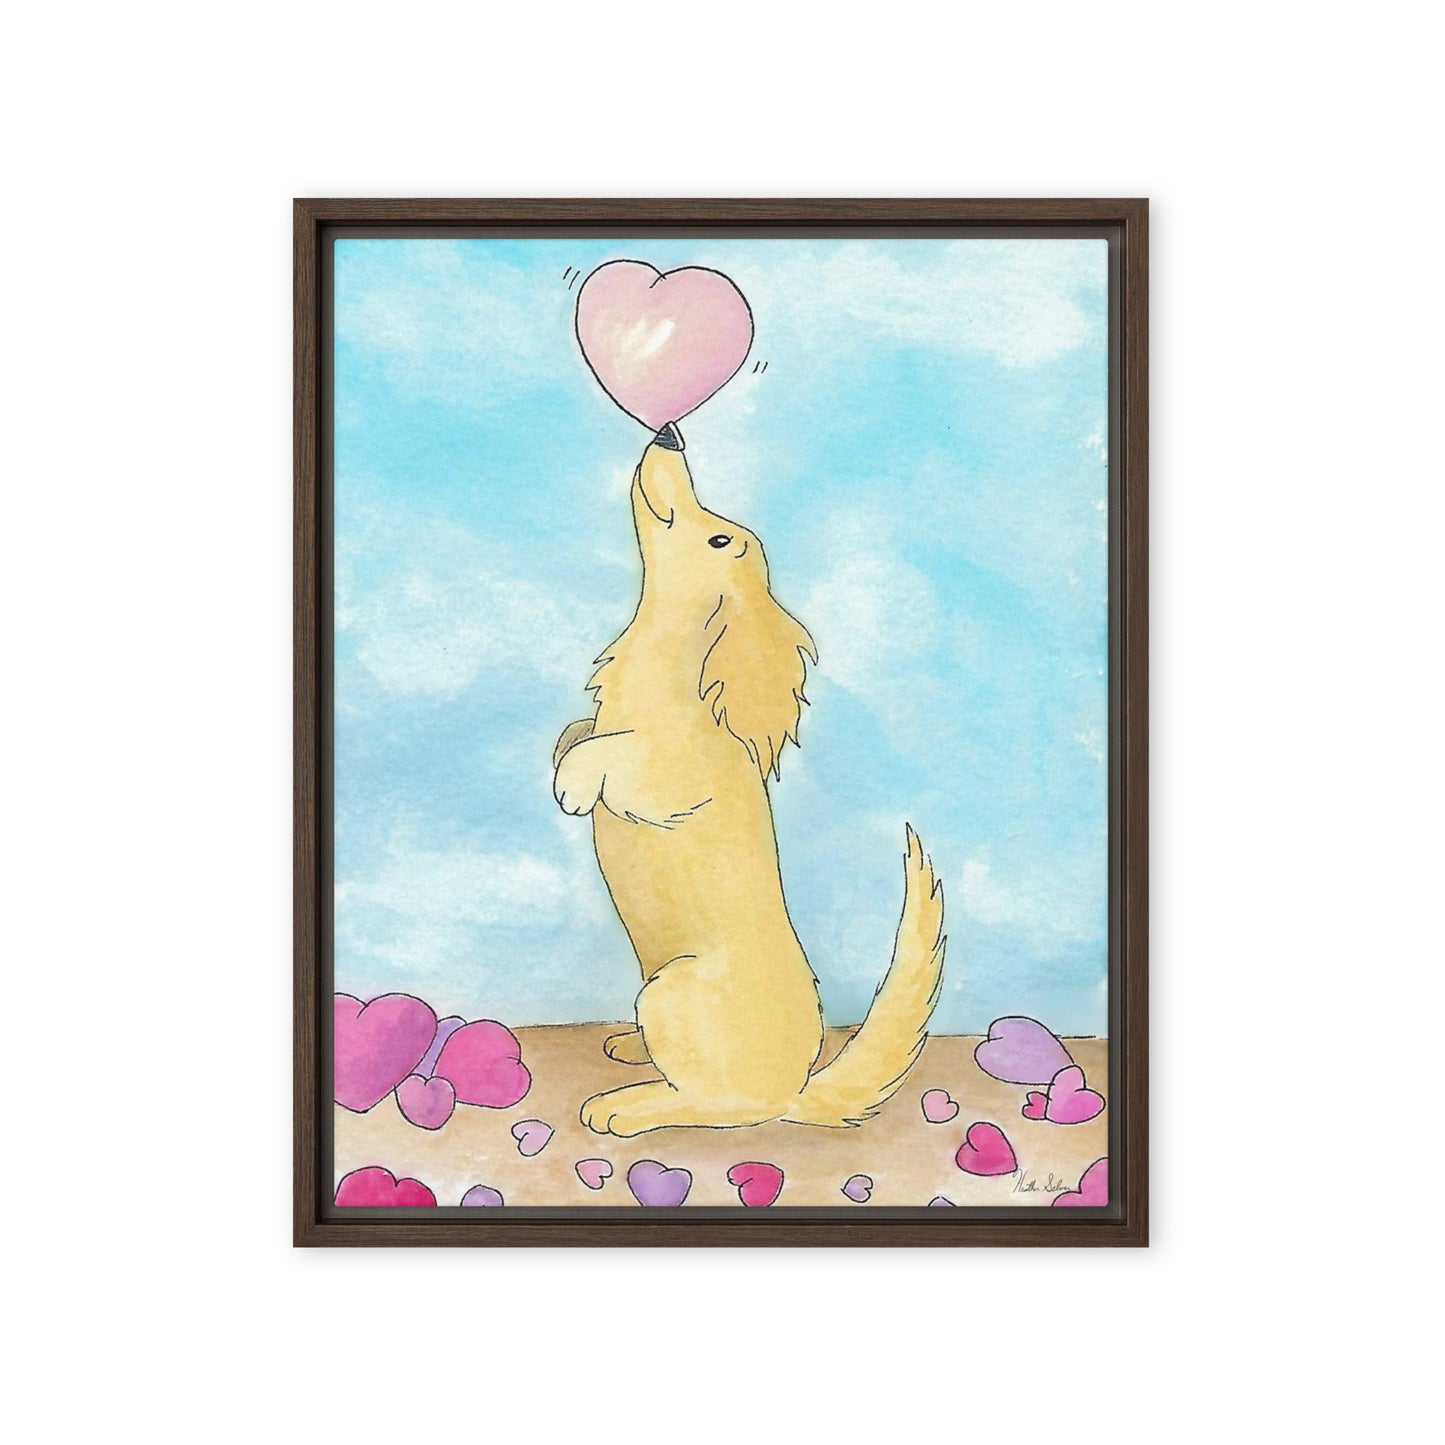 16 by 20 inch framed canvas Puppy Love print. The canvas is in a brown pine wood frame.